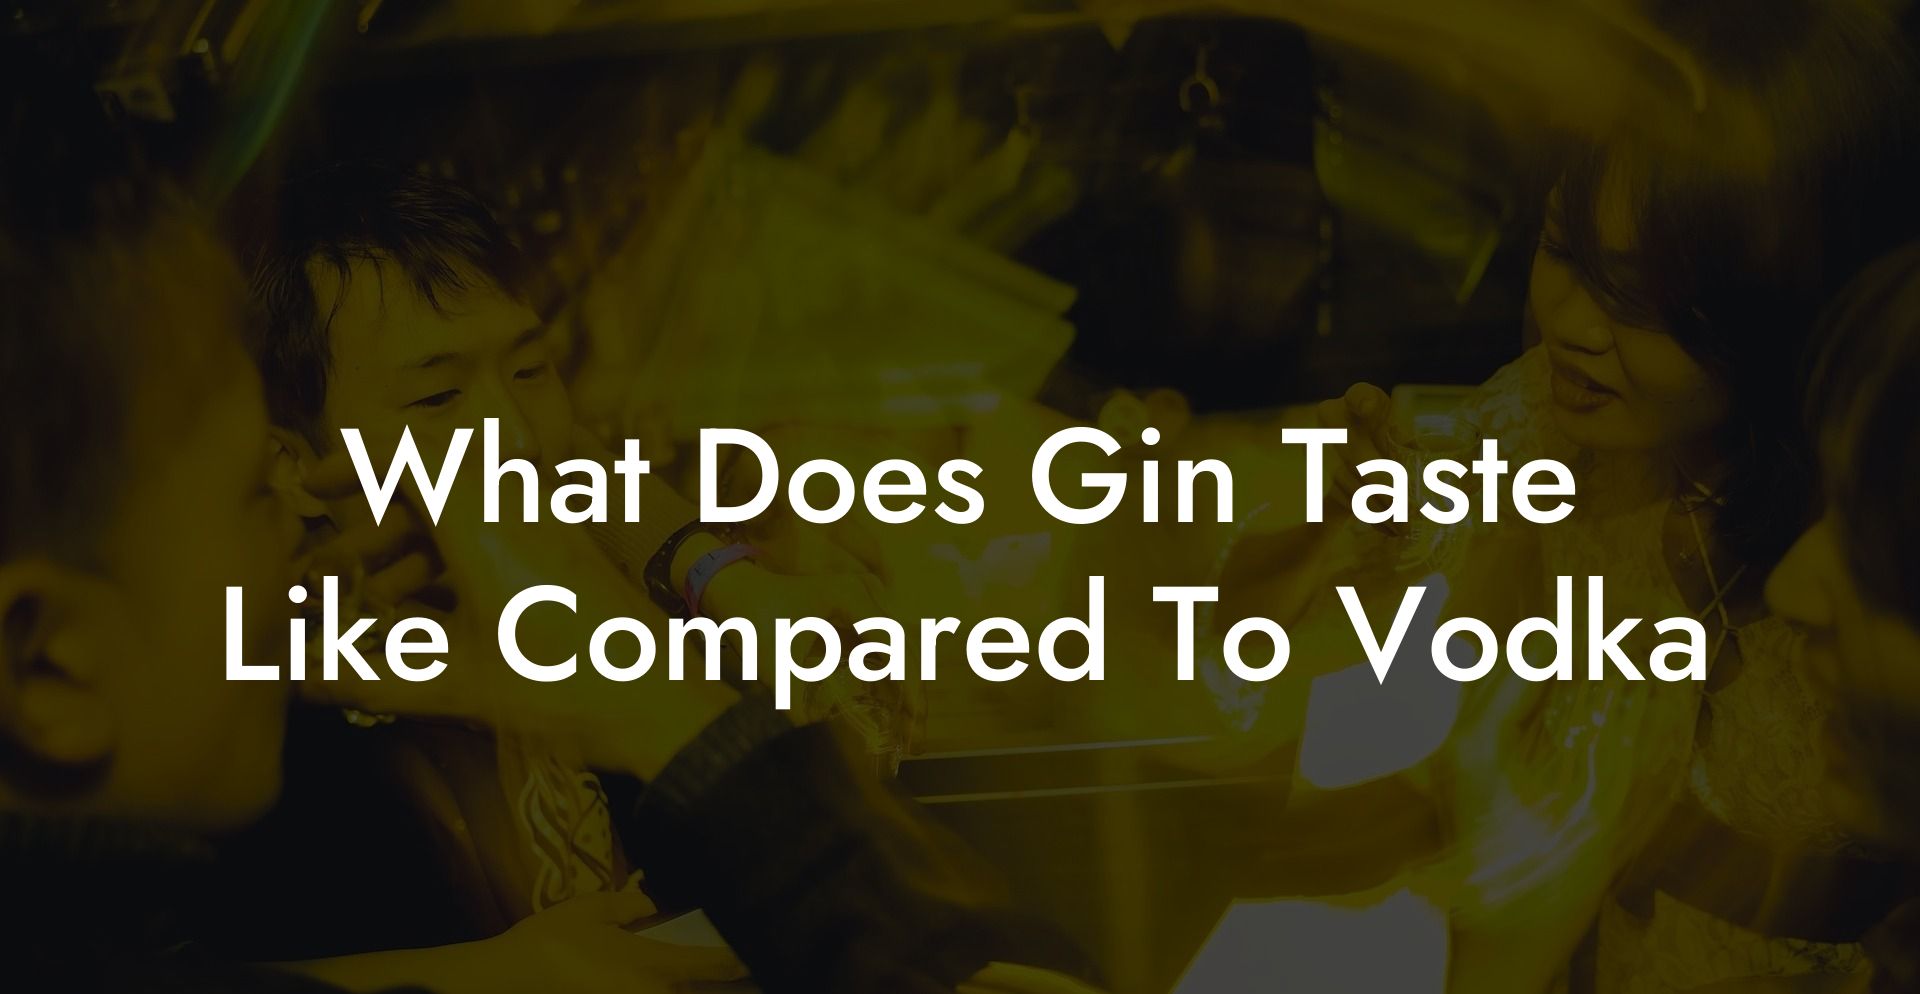 What Does Gin Taste Like Compared To Vodka